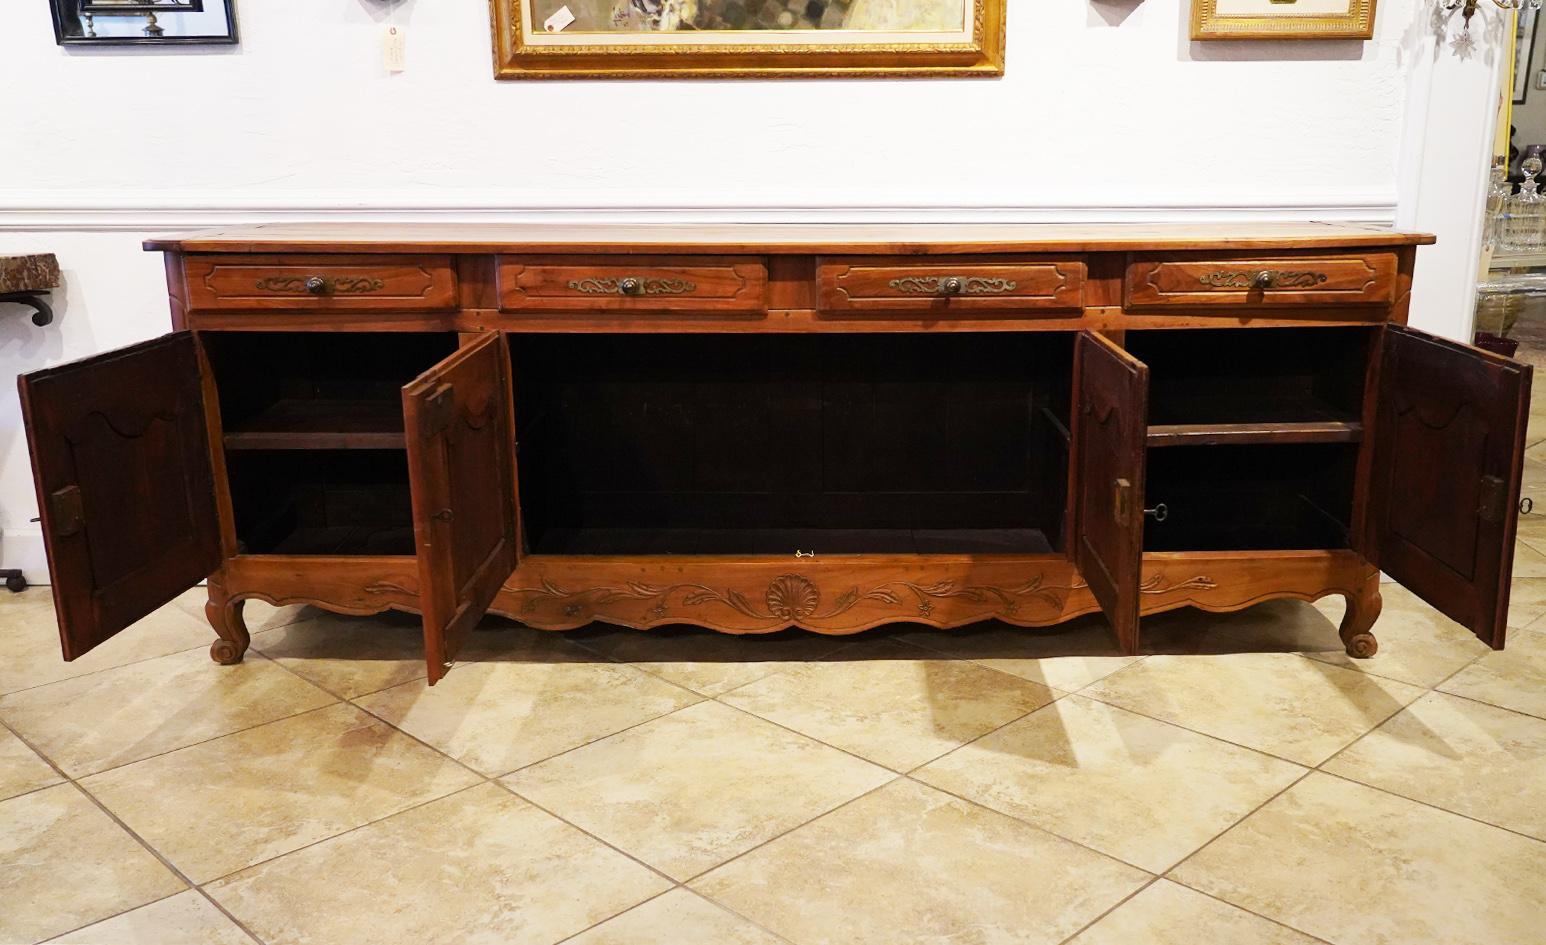 18th Century French Provincial Extra Long Carved Cherry Wood Buffet or Enfilade 2